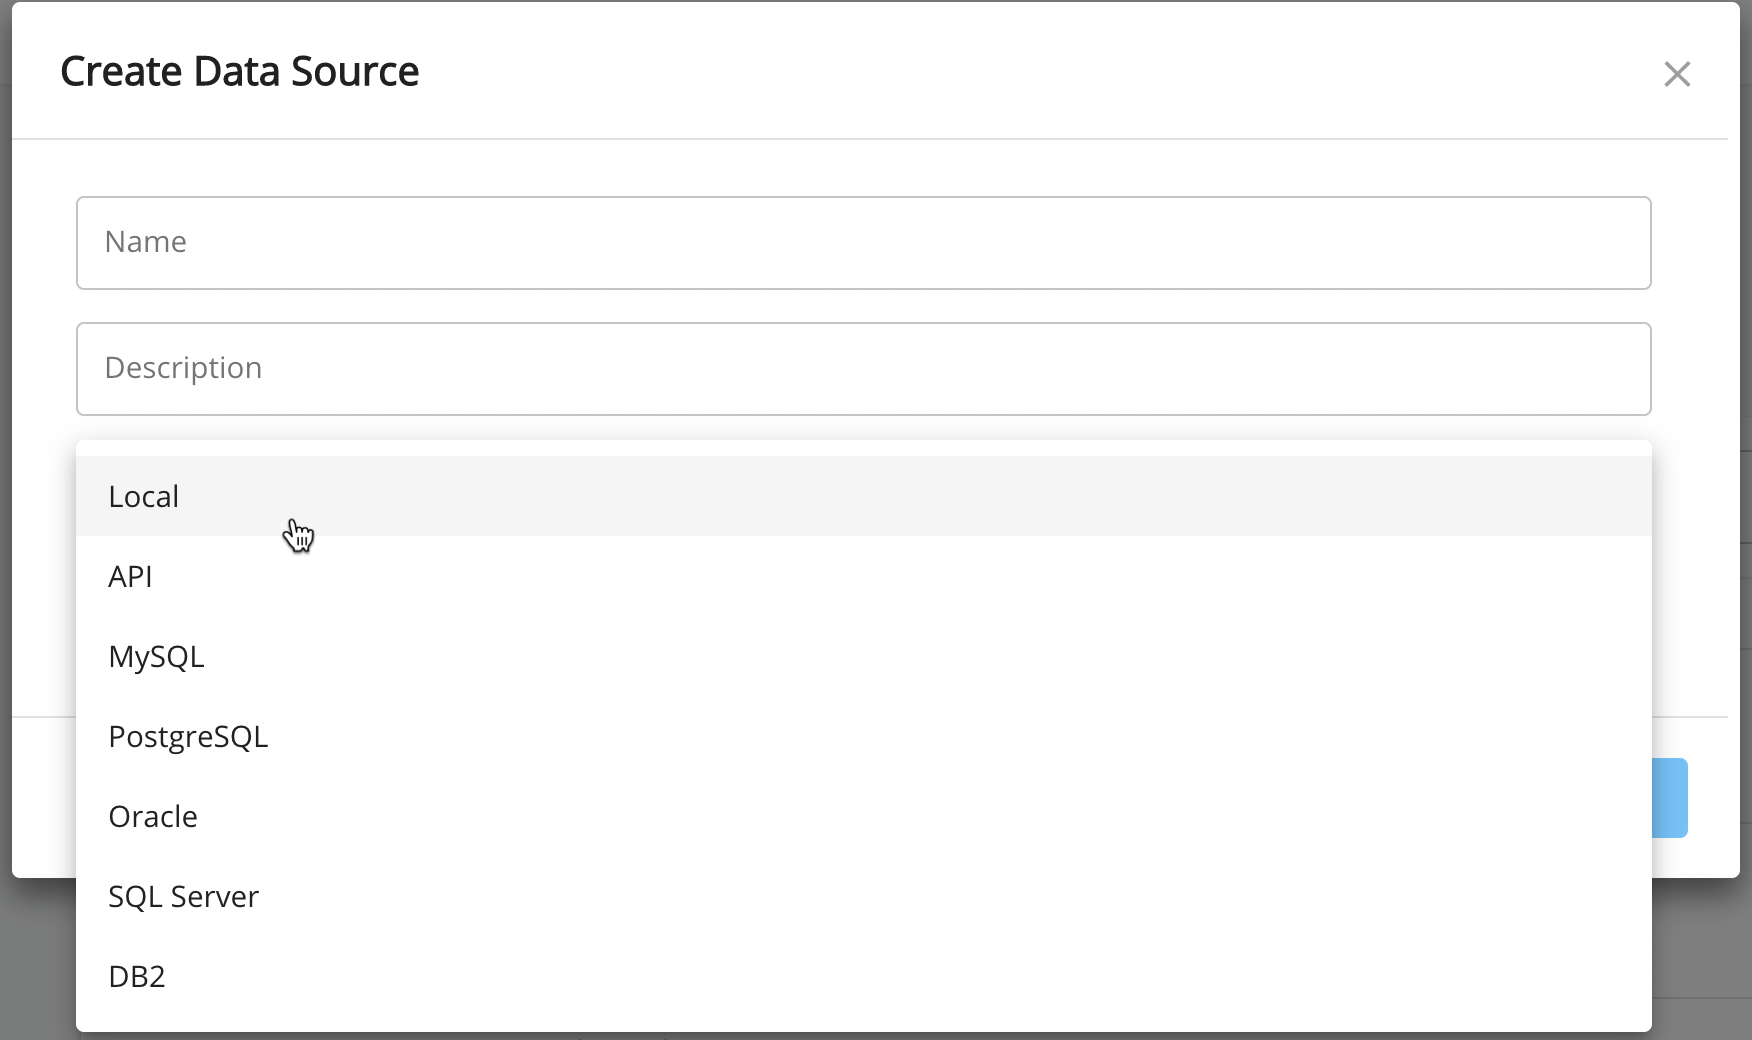 Data source types in the "Create New Source" page